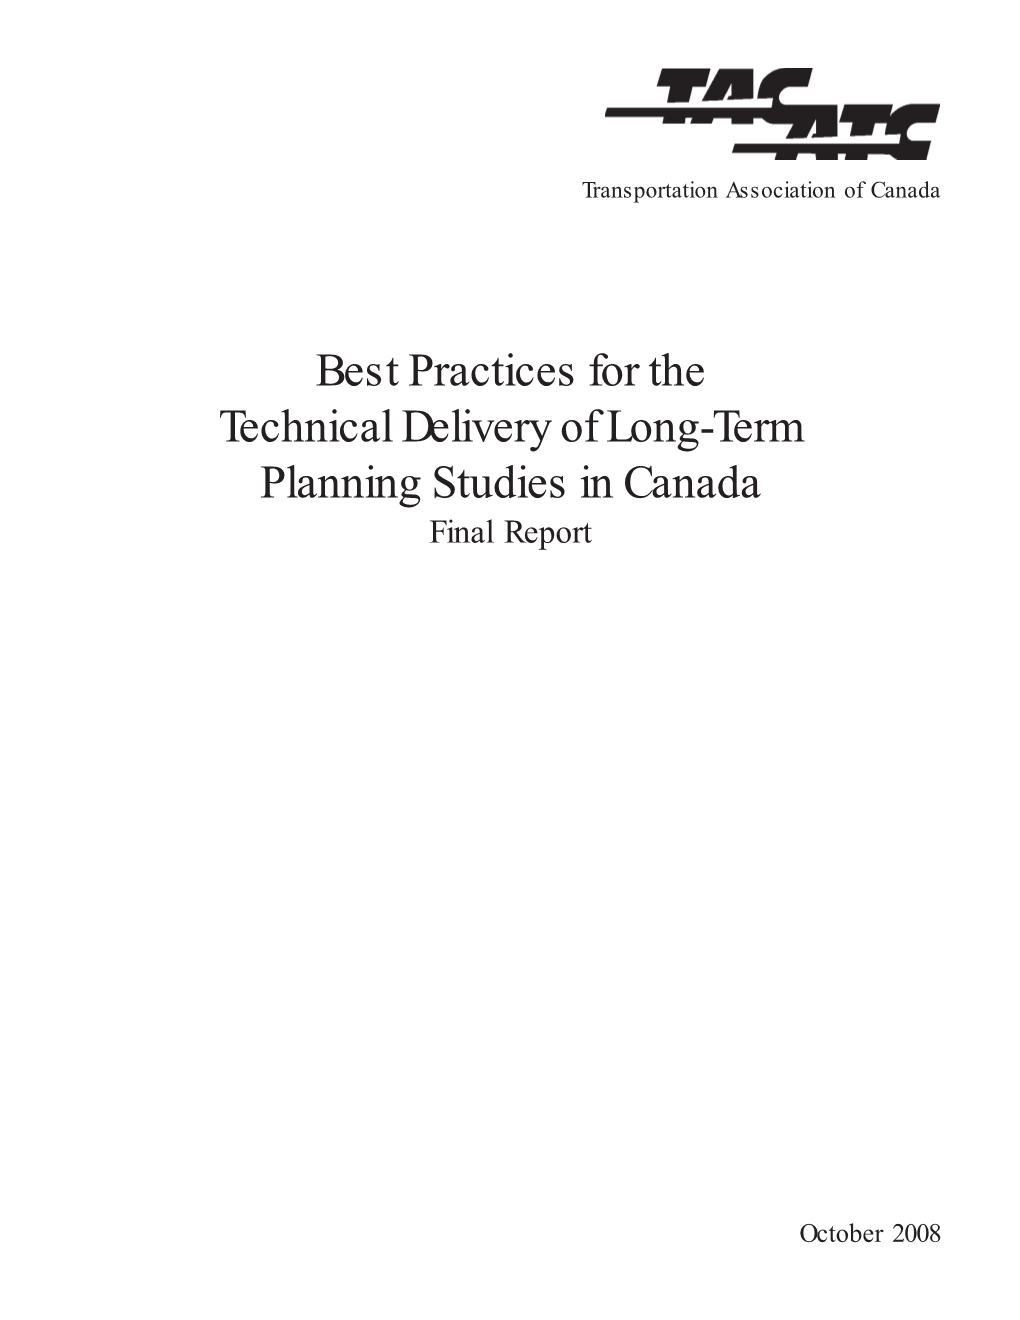 Best Practices for the Technical Delivery of Long-Term Planning Studies in Canada Final Report